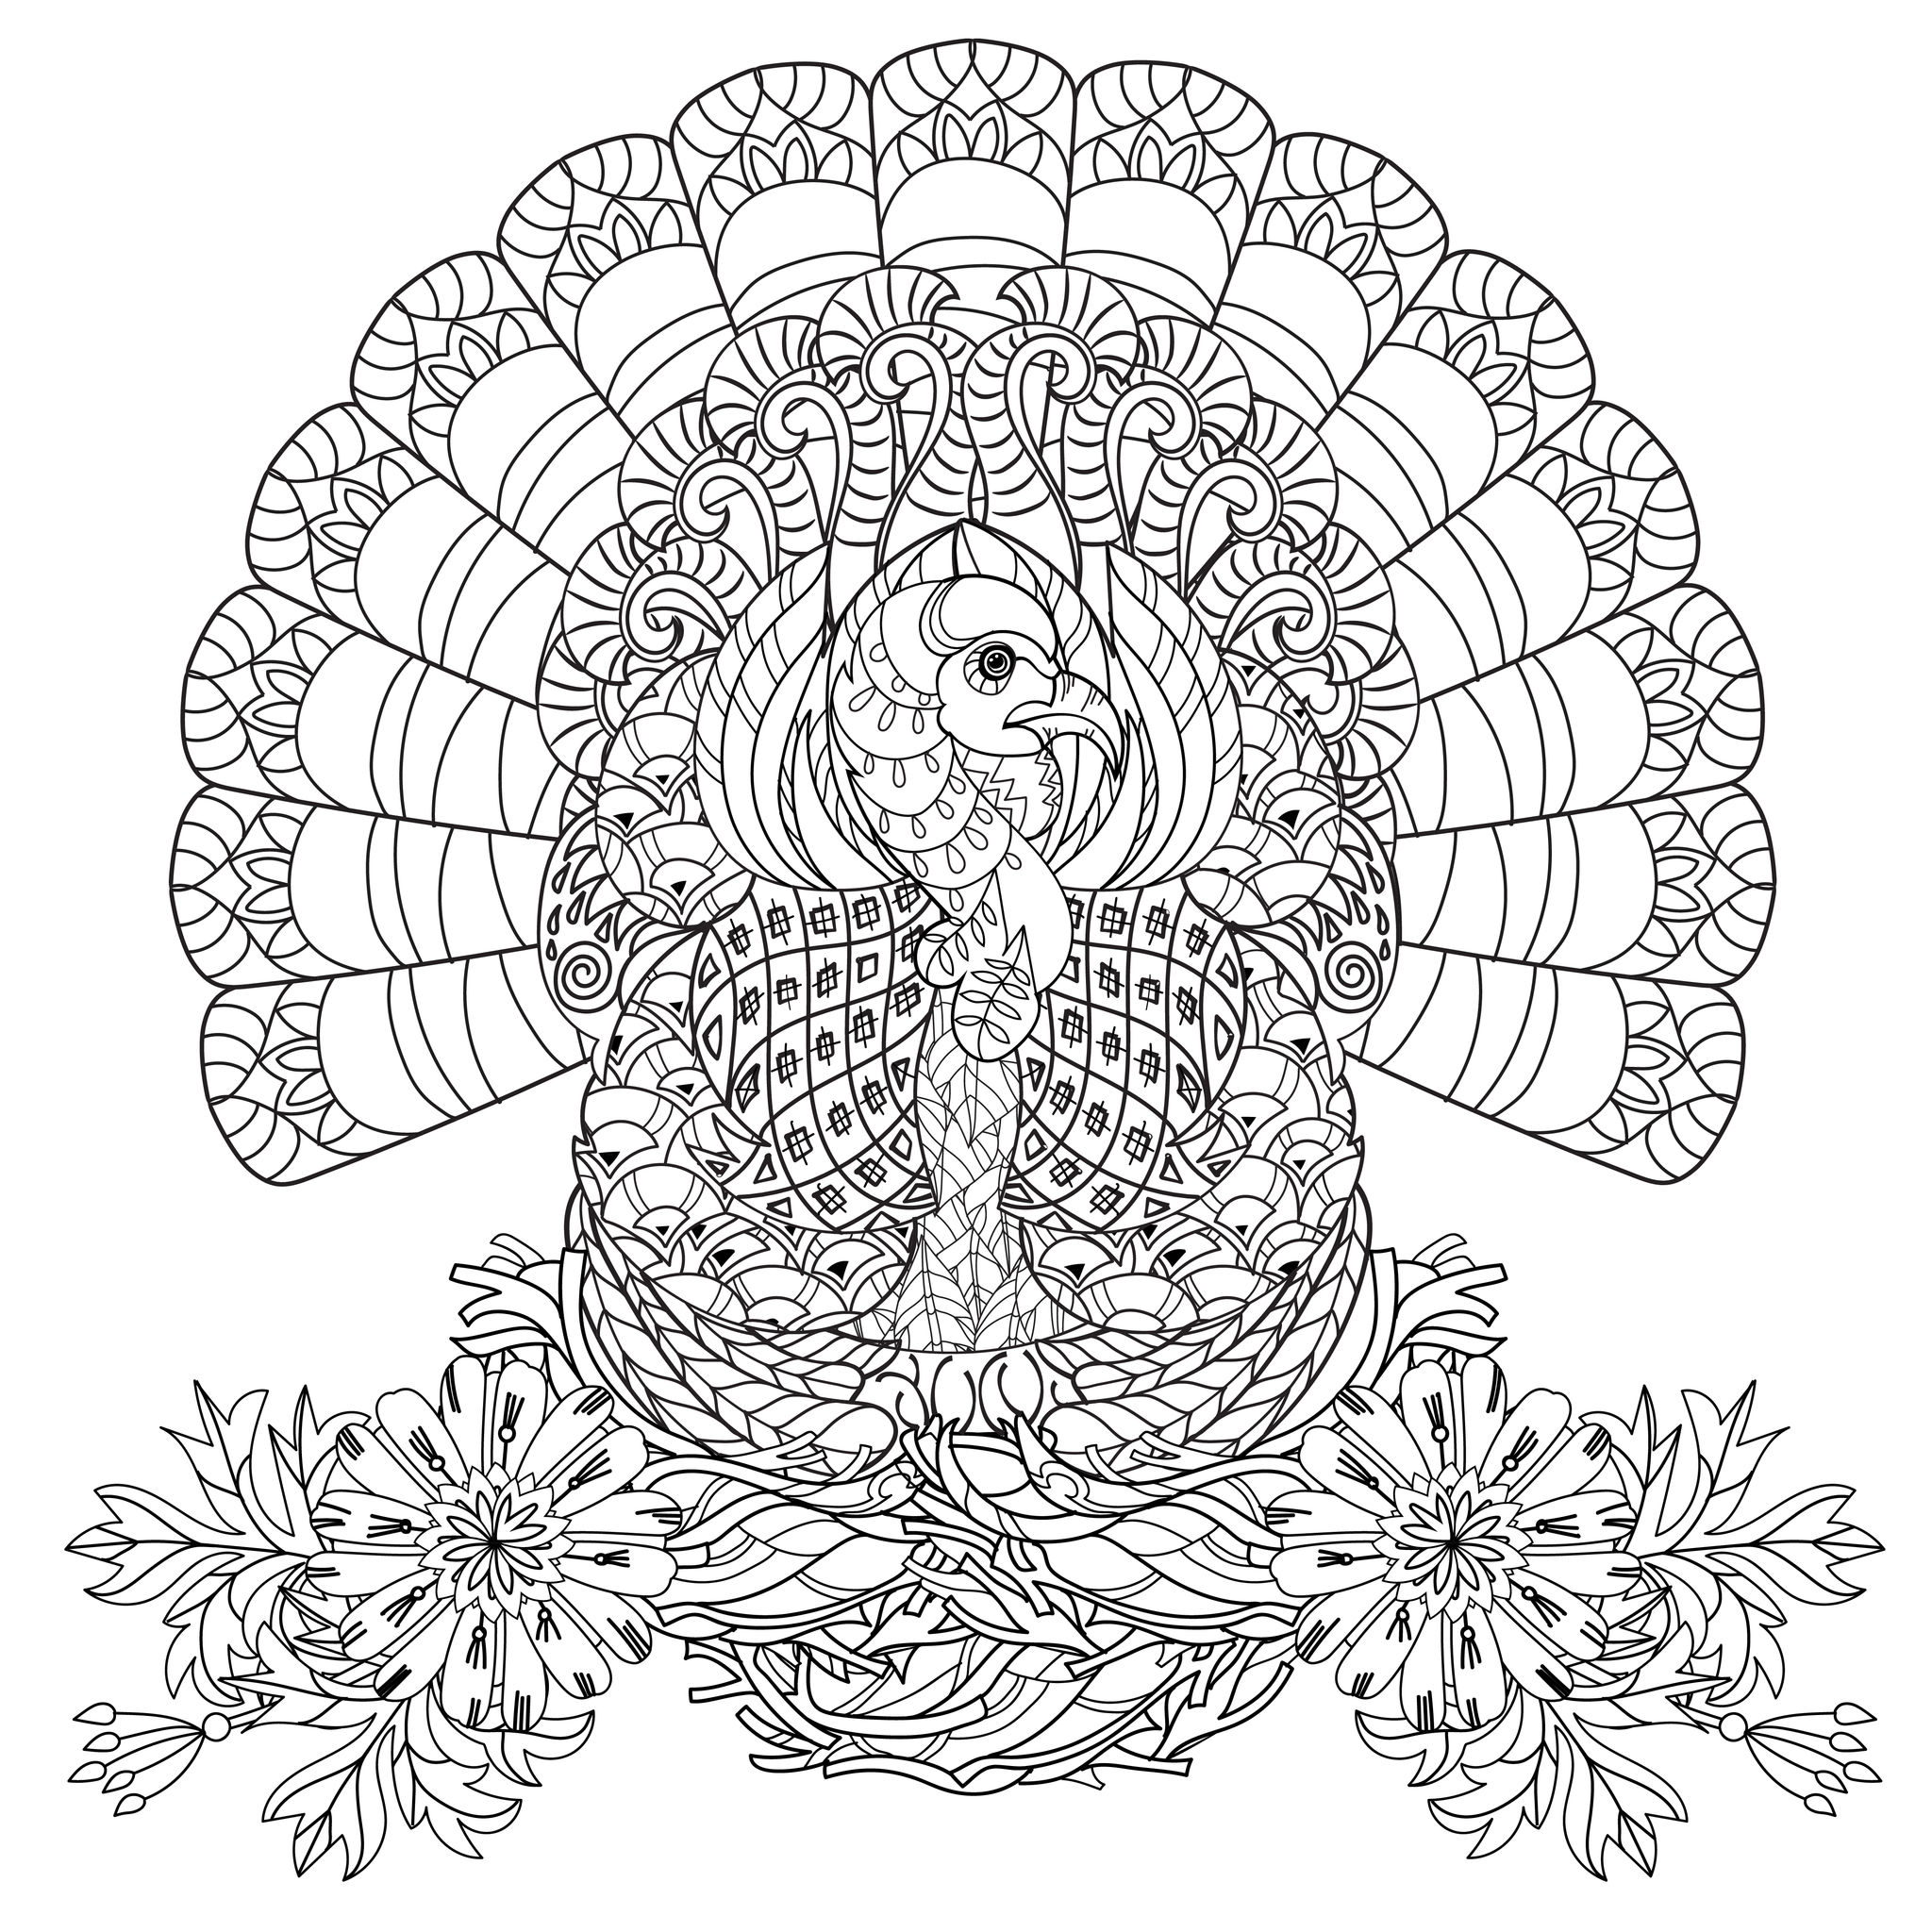 Thanksgiving Turkey Adult Coloring Page Staggering Image Ideas